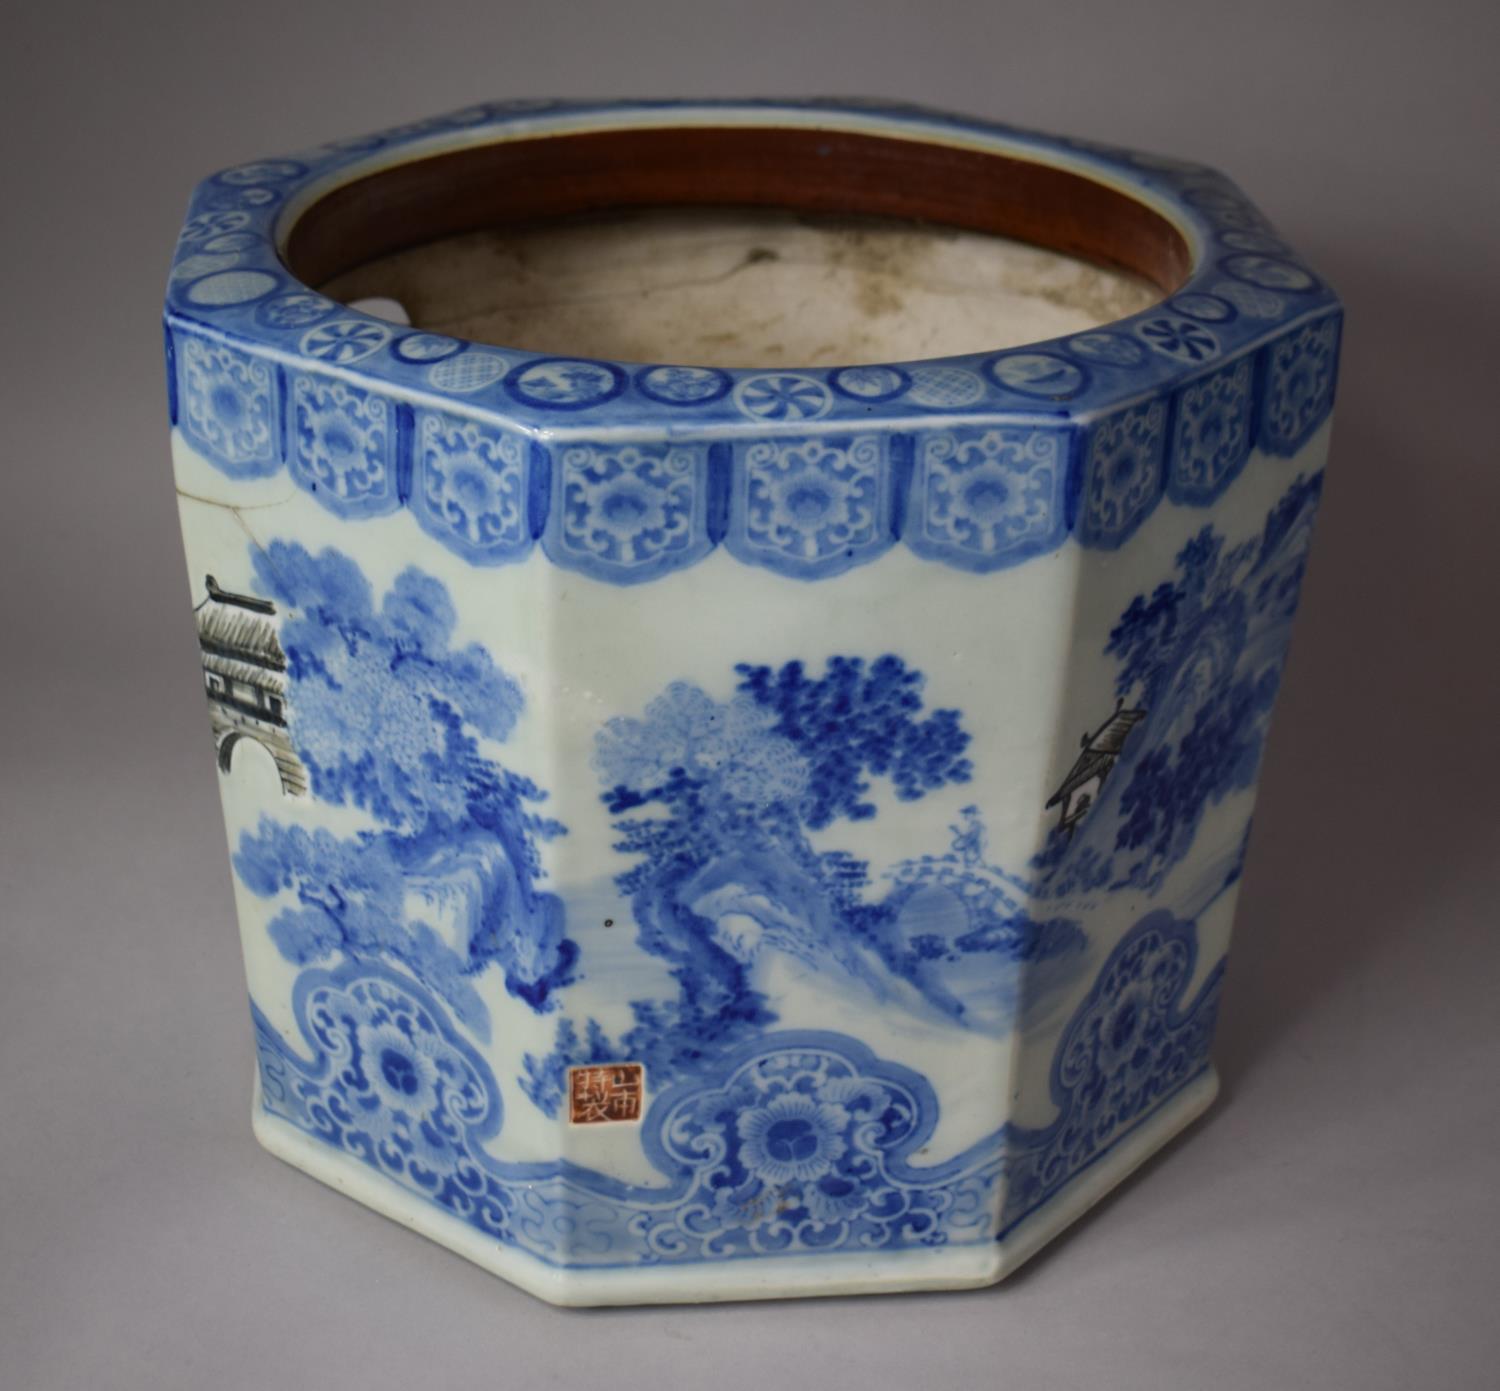 A Large Rectangular Blue and White Oriental Planter with Red Seal Mark to Side Panel, Crack and Loss - Image 2 of 7